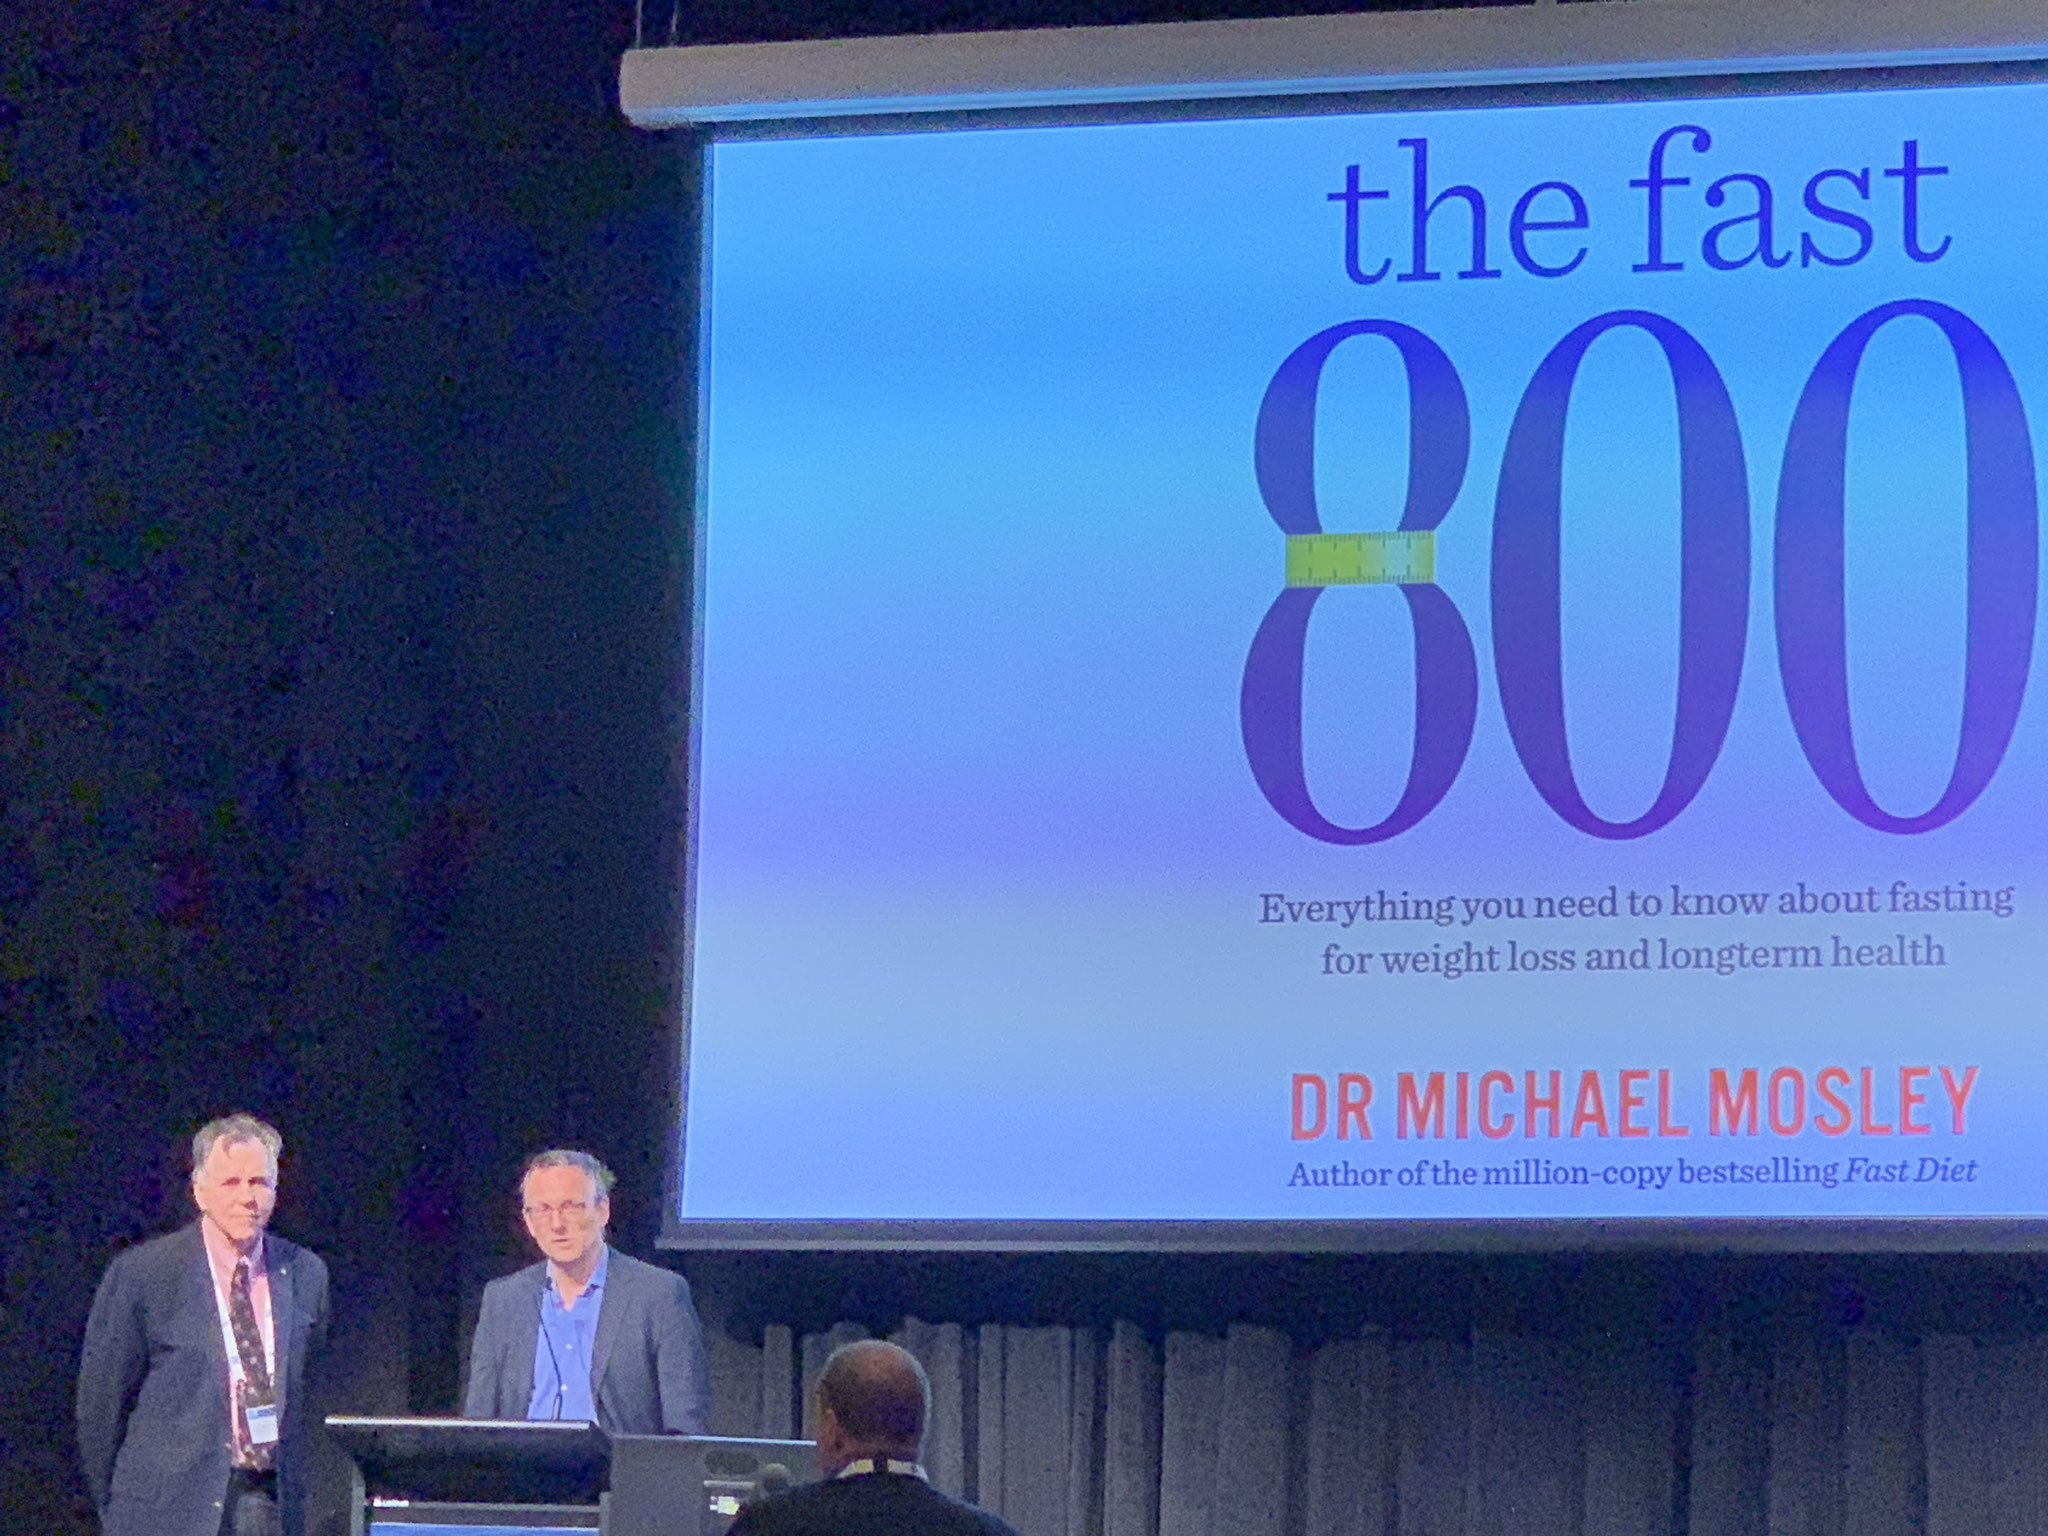 Prof Barry Marshall & Dr Michael Mosley 2019 at Science on Swan Seminar